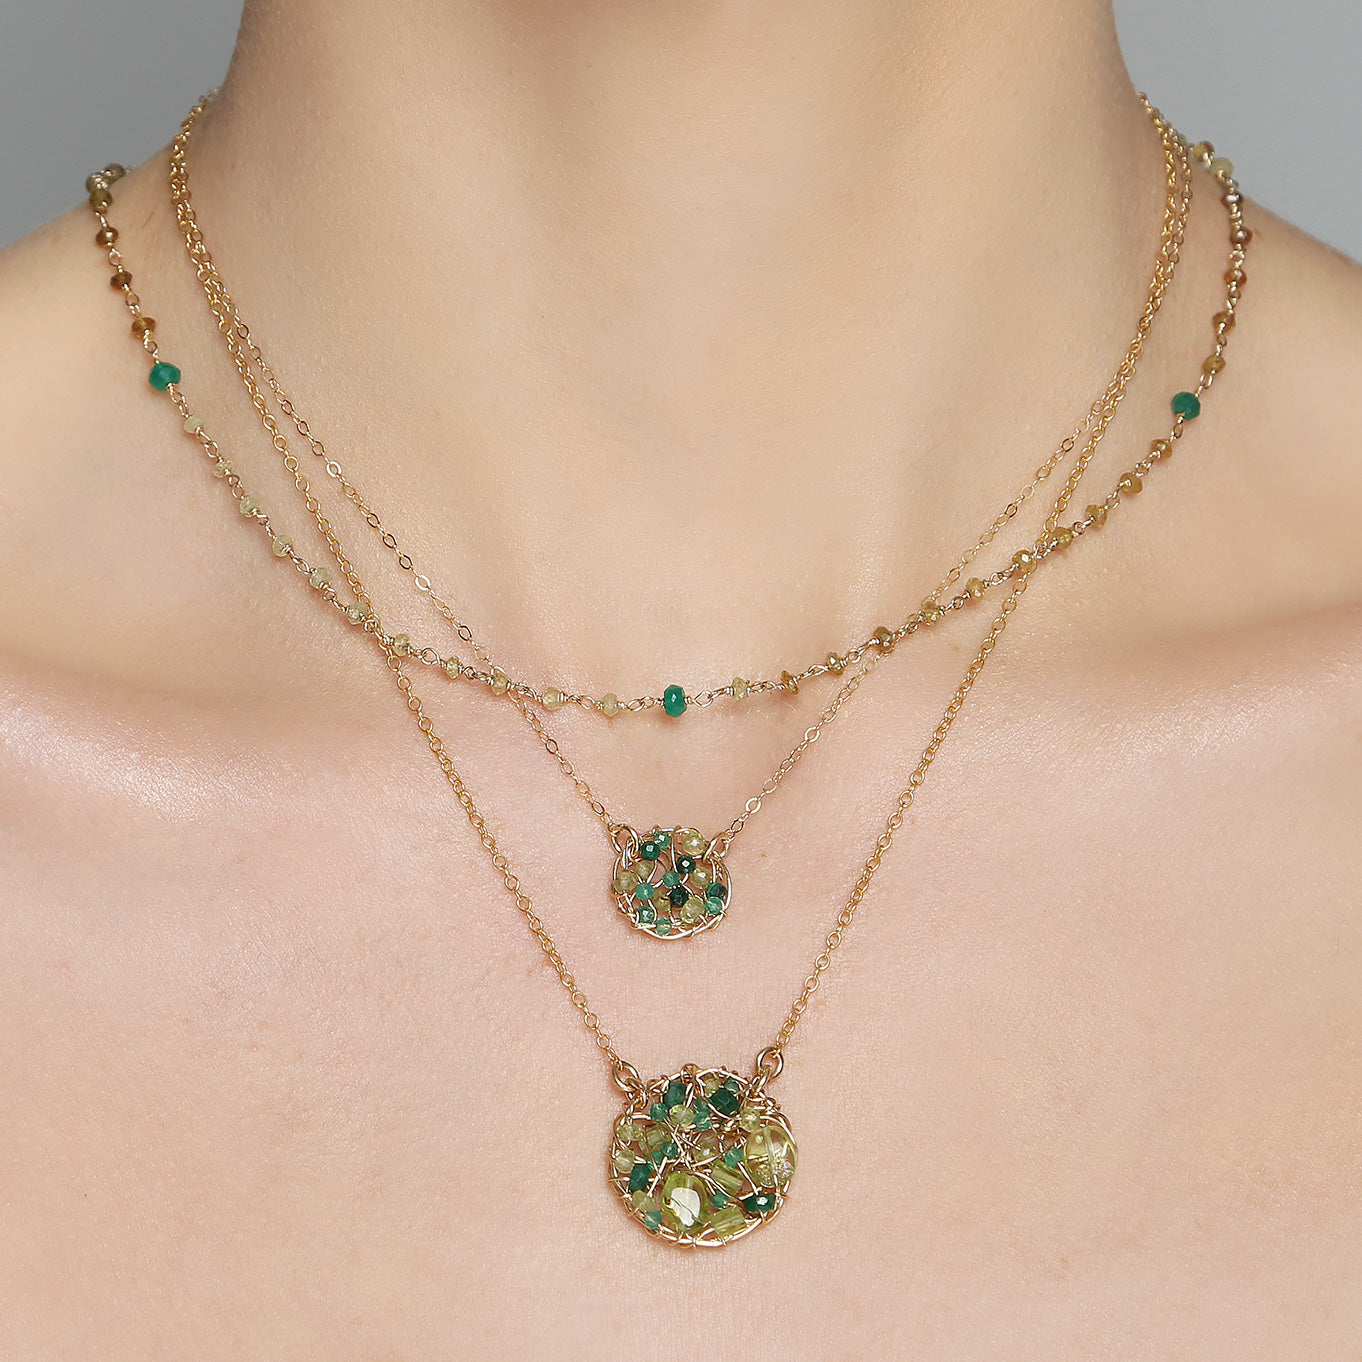 Aura Necklace #2 (20mm) - Green Mix Gems Necklaces TARBAY   